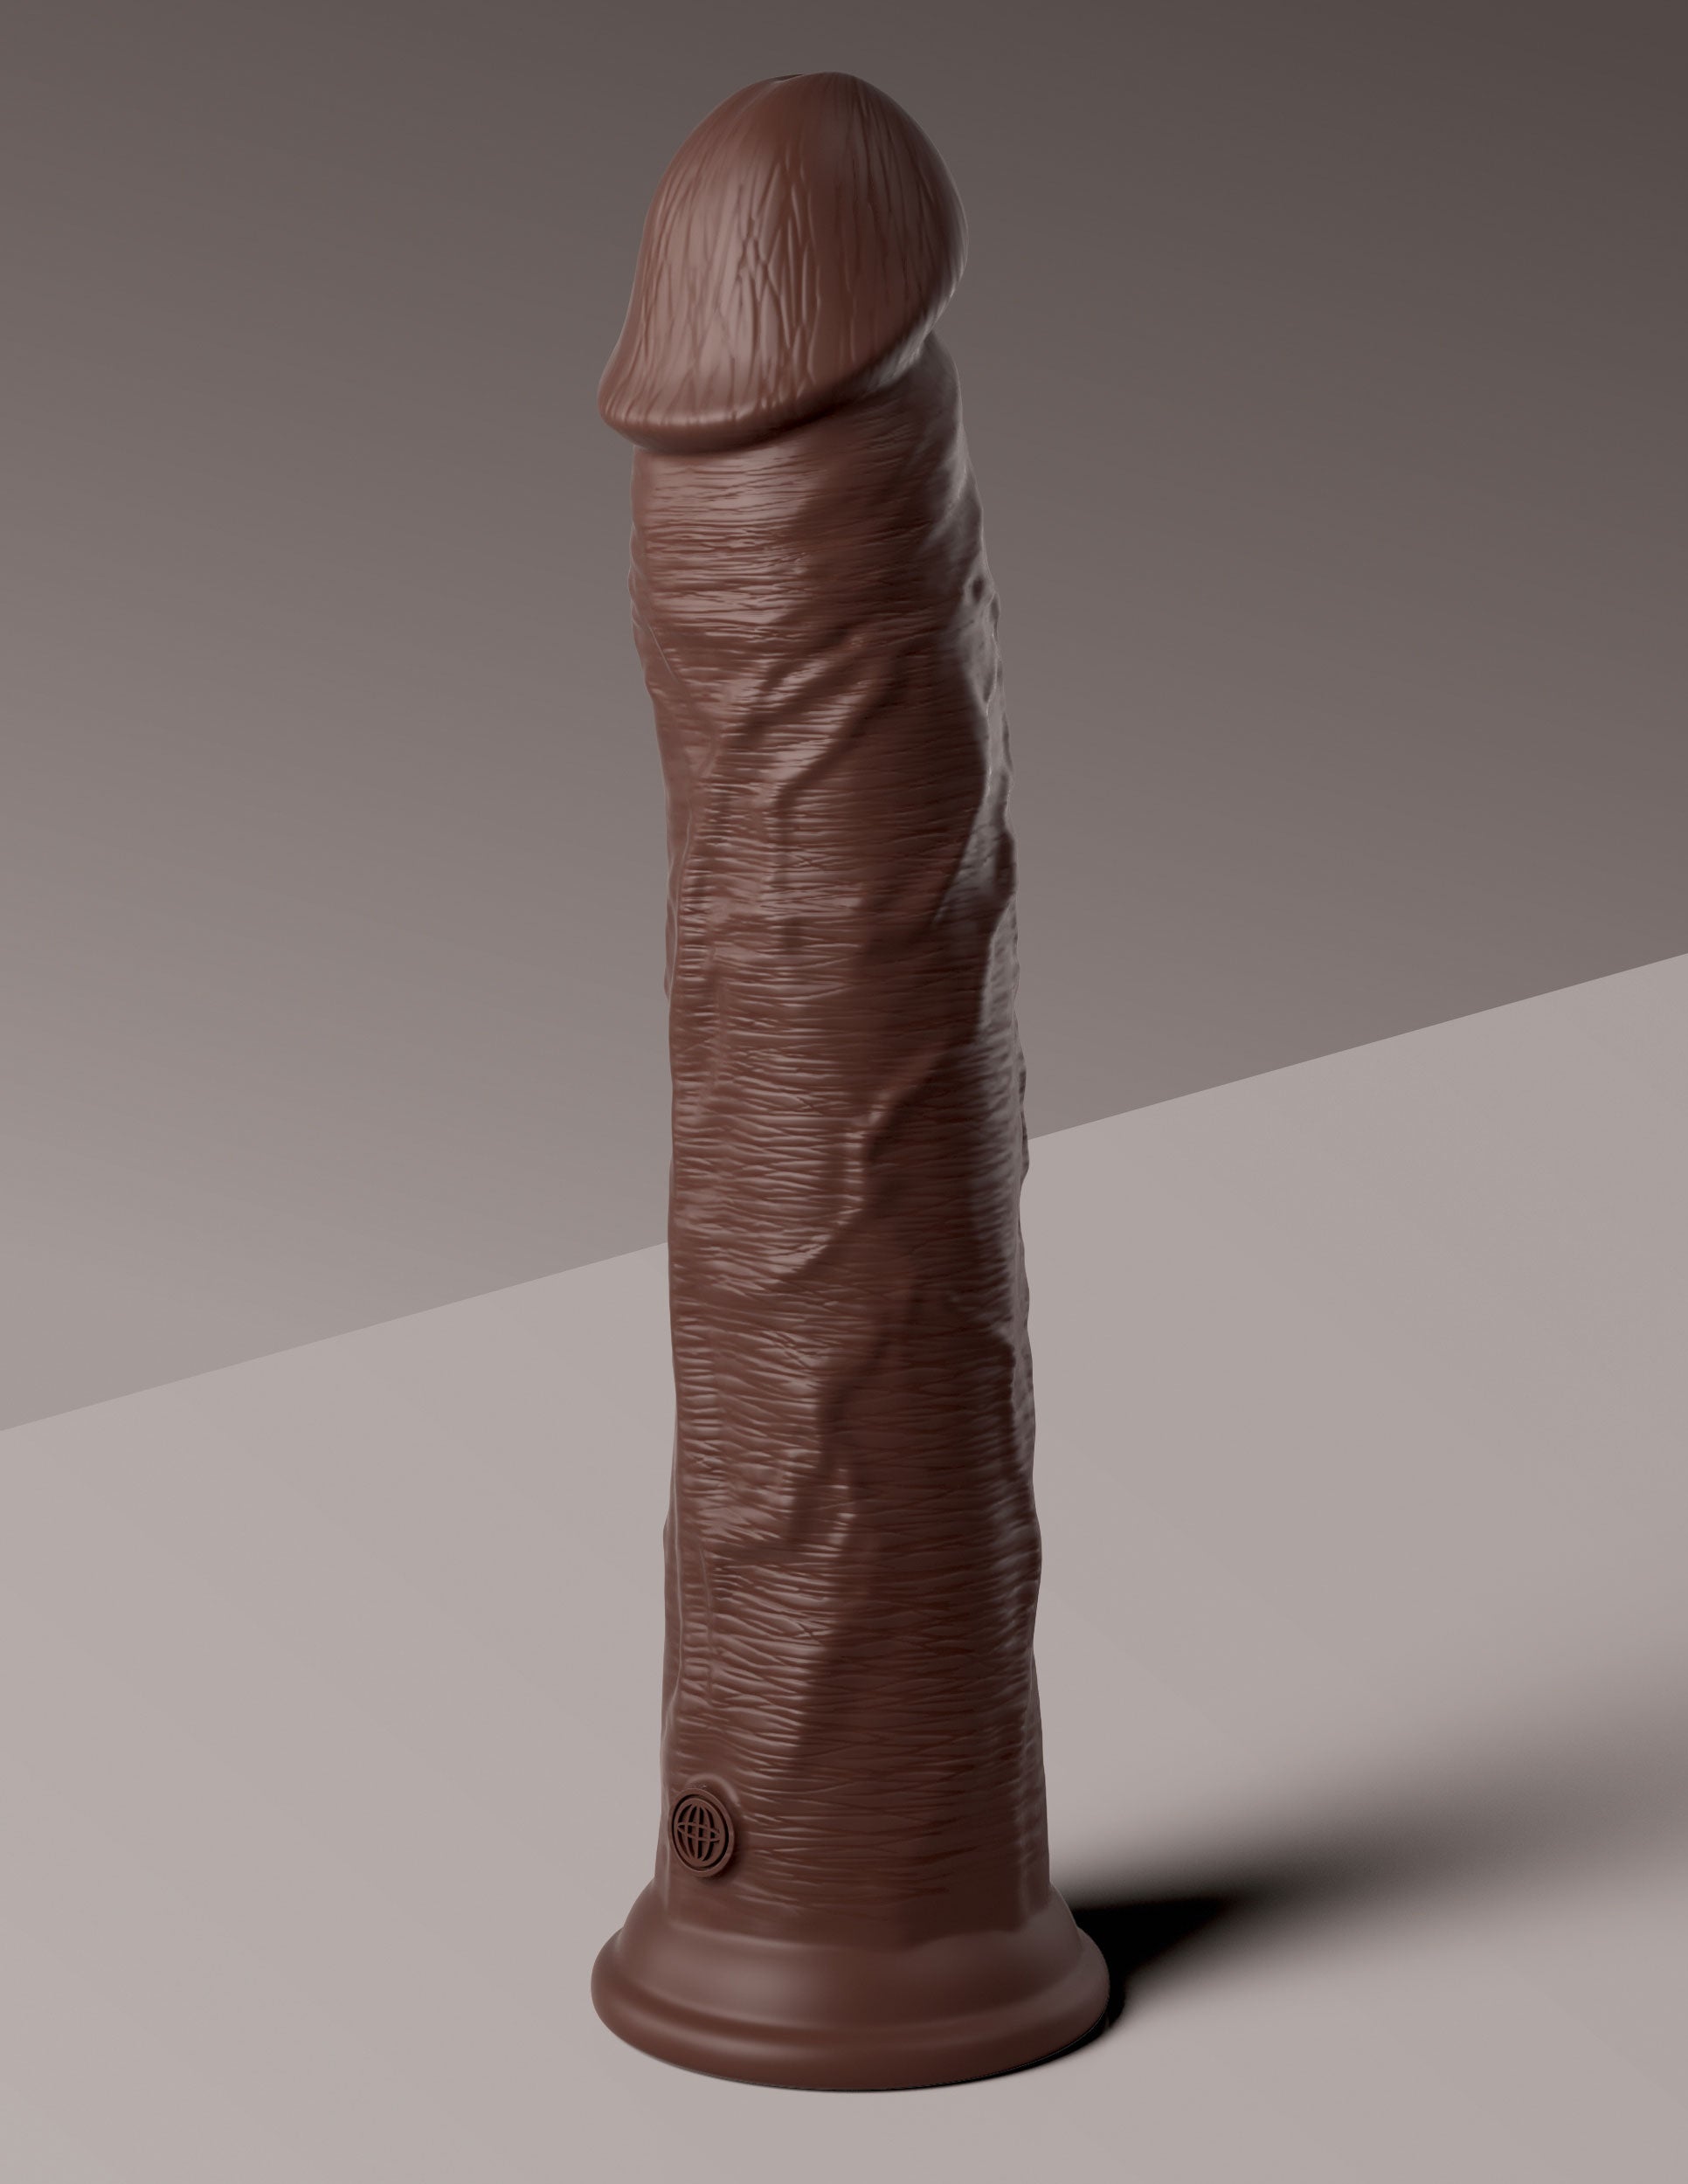 King Cock Elite 11 Inch Silicone Dual Density Cock - Brown Brown